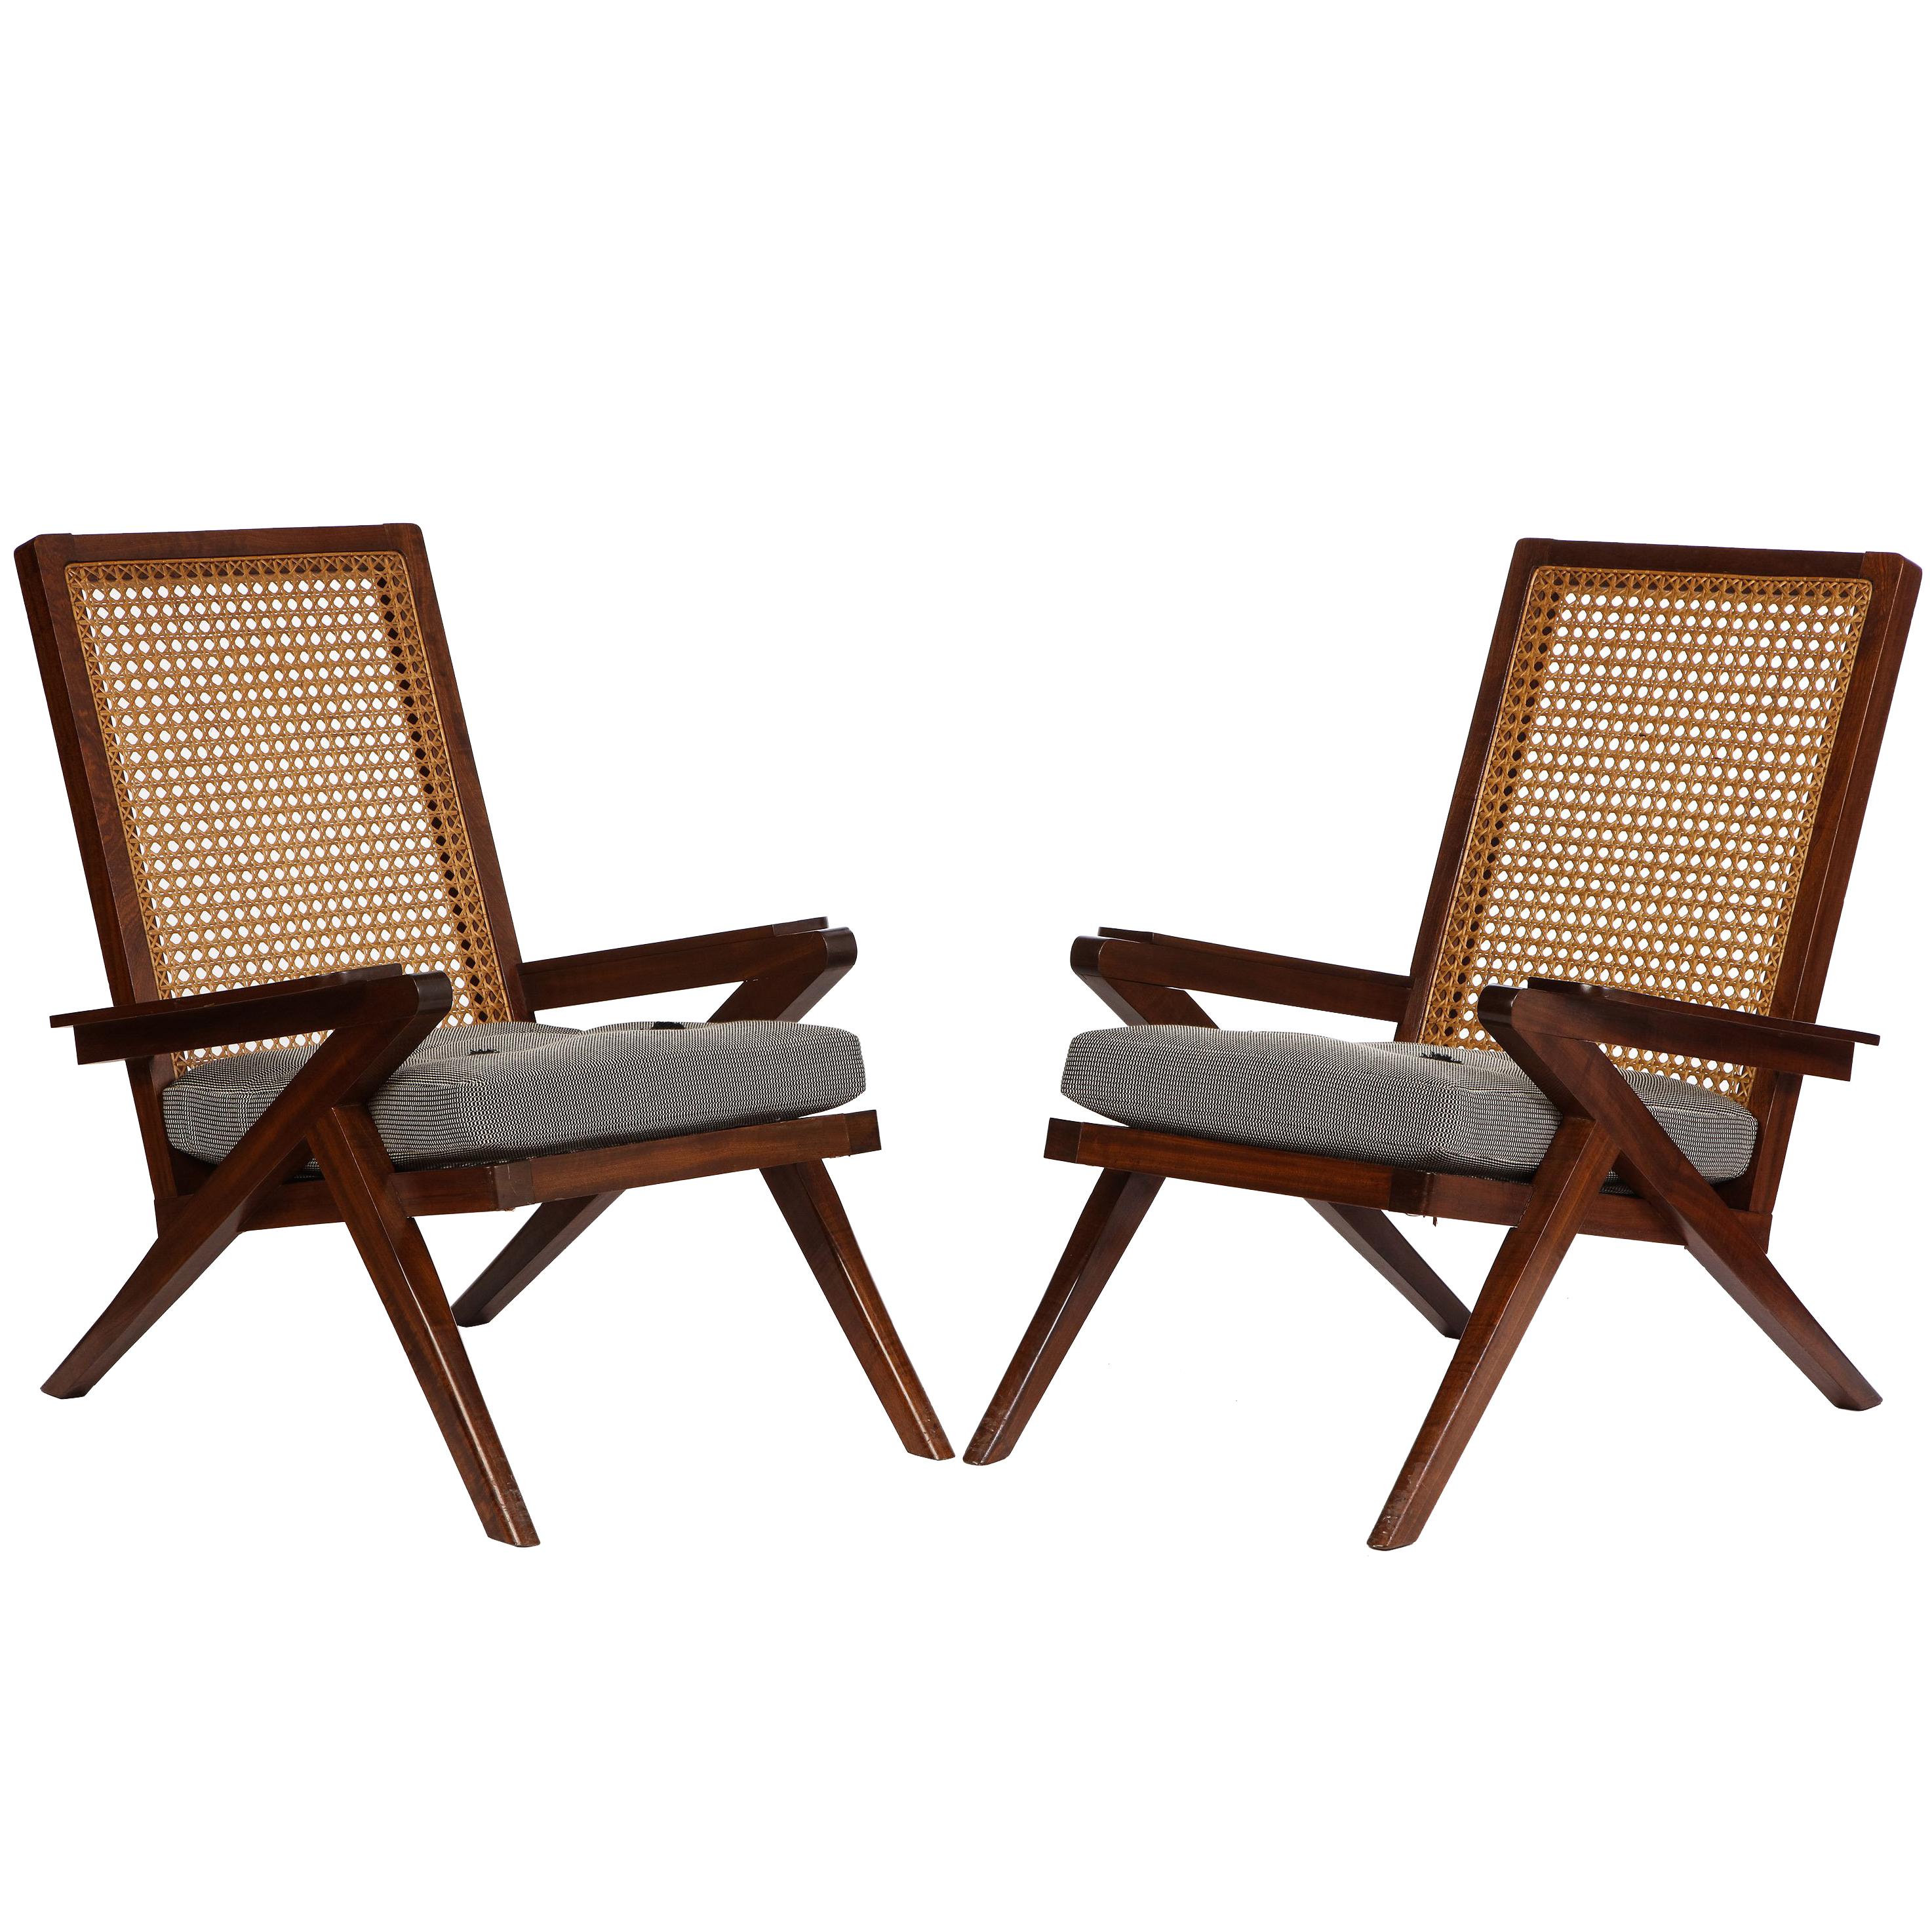 Pair of French 'Art Moderne' Mahogany and Caned Armchairs, 20th Century